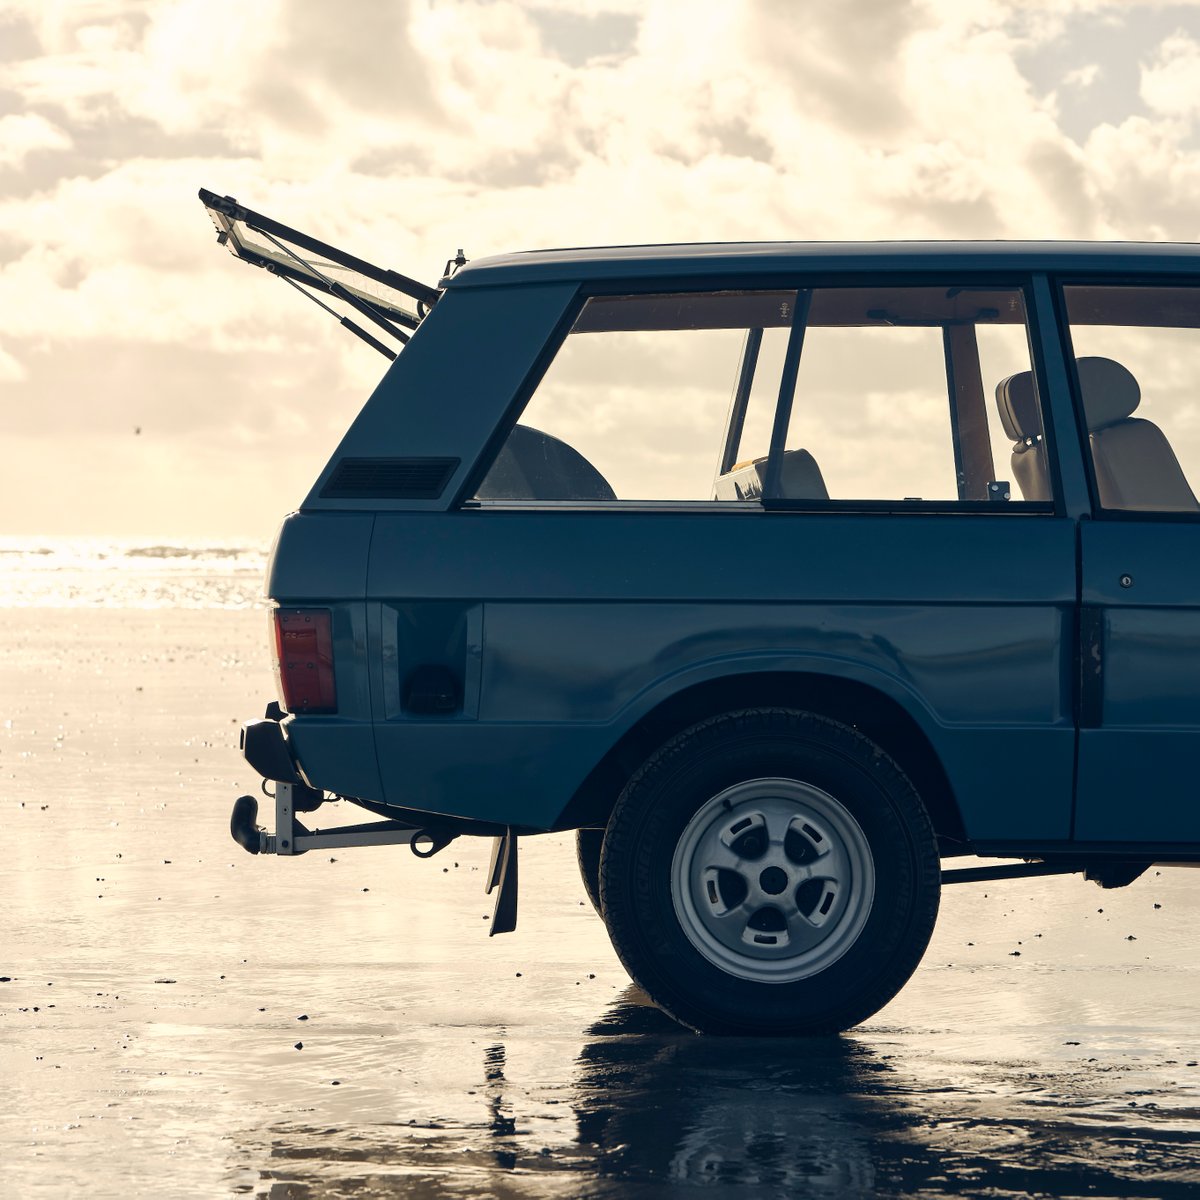 “The Range Rover was a design made with conviction and ingenuity, one whose technical intelligence matched its aesthetic purity.” ‘Rise of the SUV’ by Stephen Bayley, The Road Rat Edition 16. 🔗tinyurl.com/435py6y6 1970 Range Rover ‘Velar’ photographed by Jake Curtis.